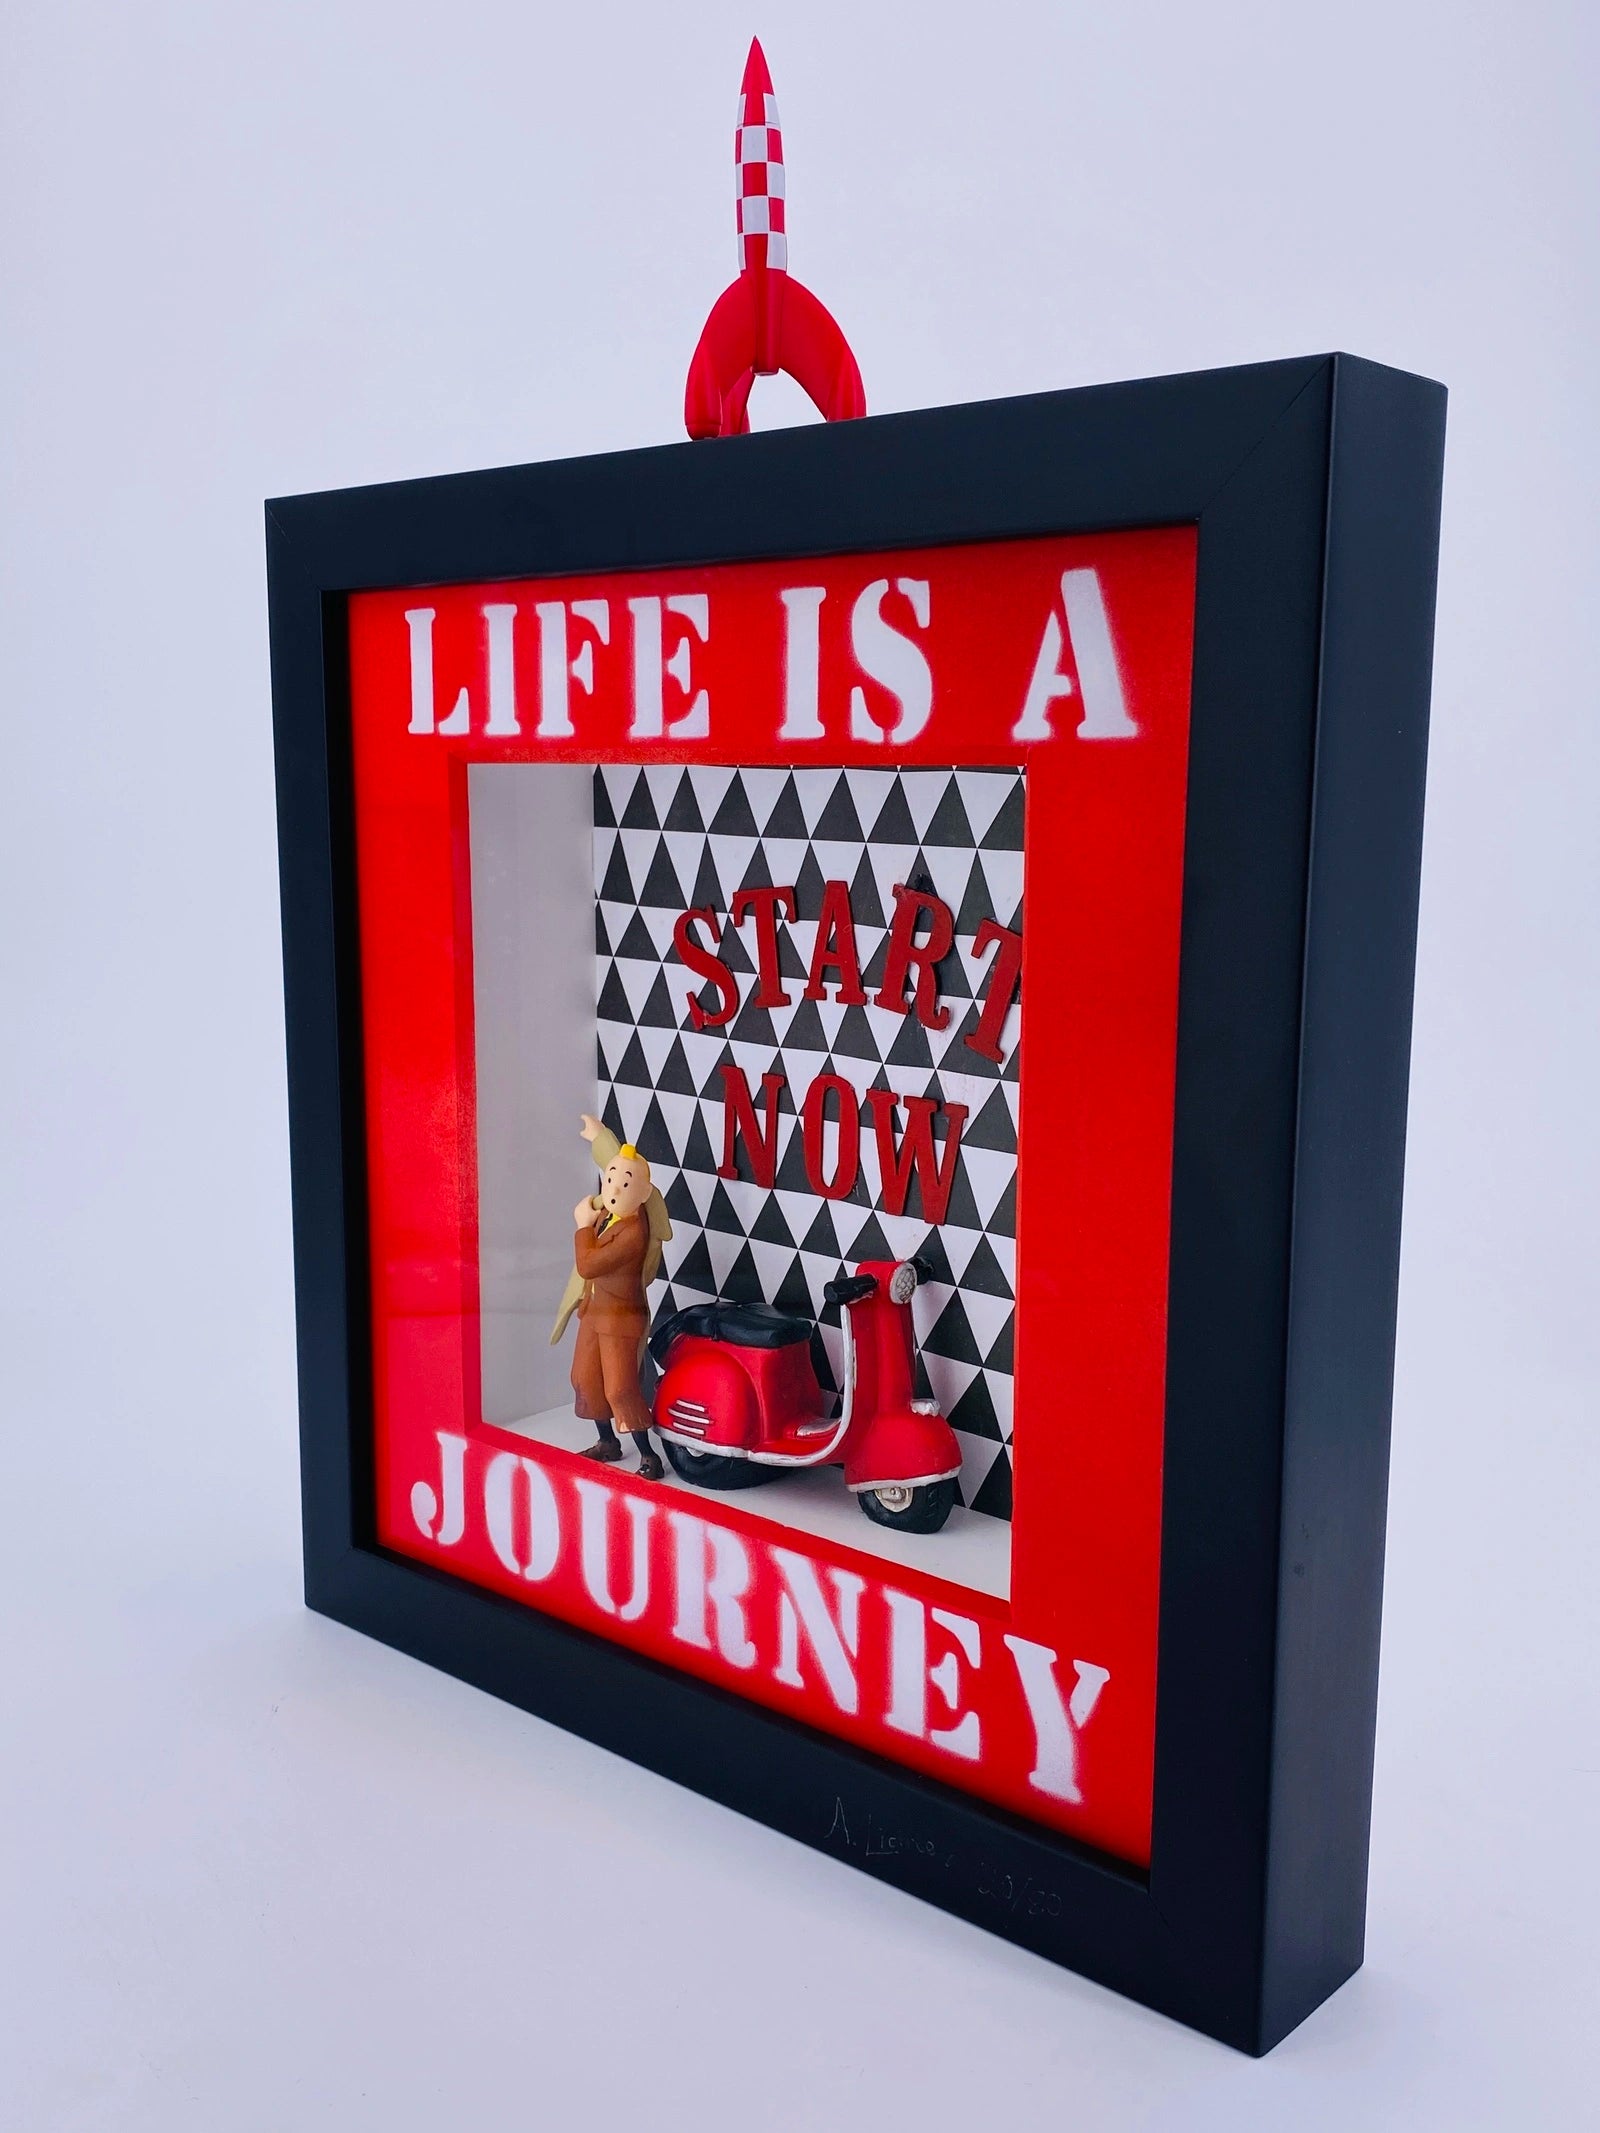 Andreas Lichter - Life is a journey - Tintin - Galerie Vogel